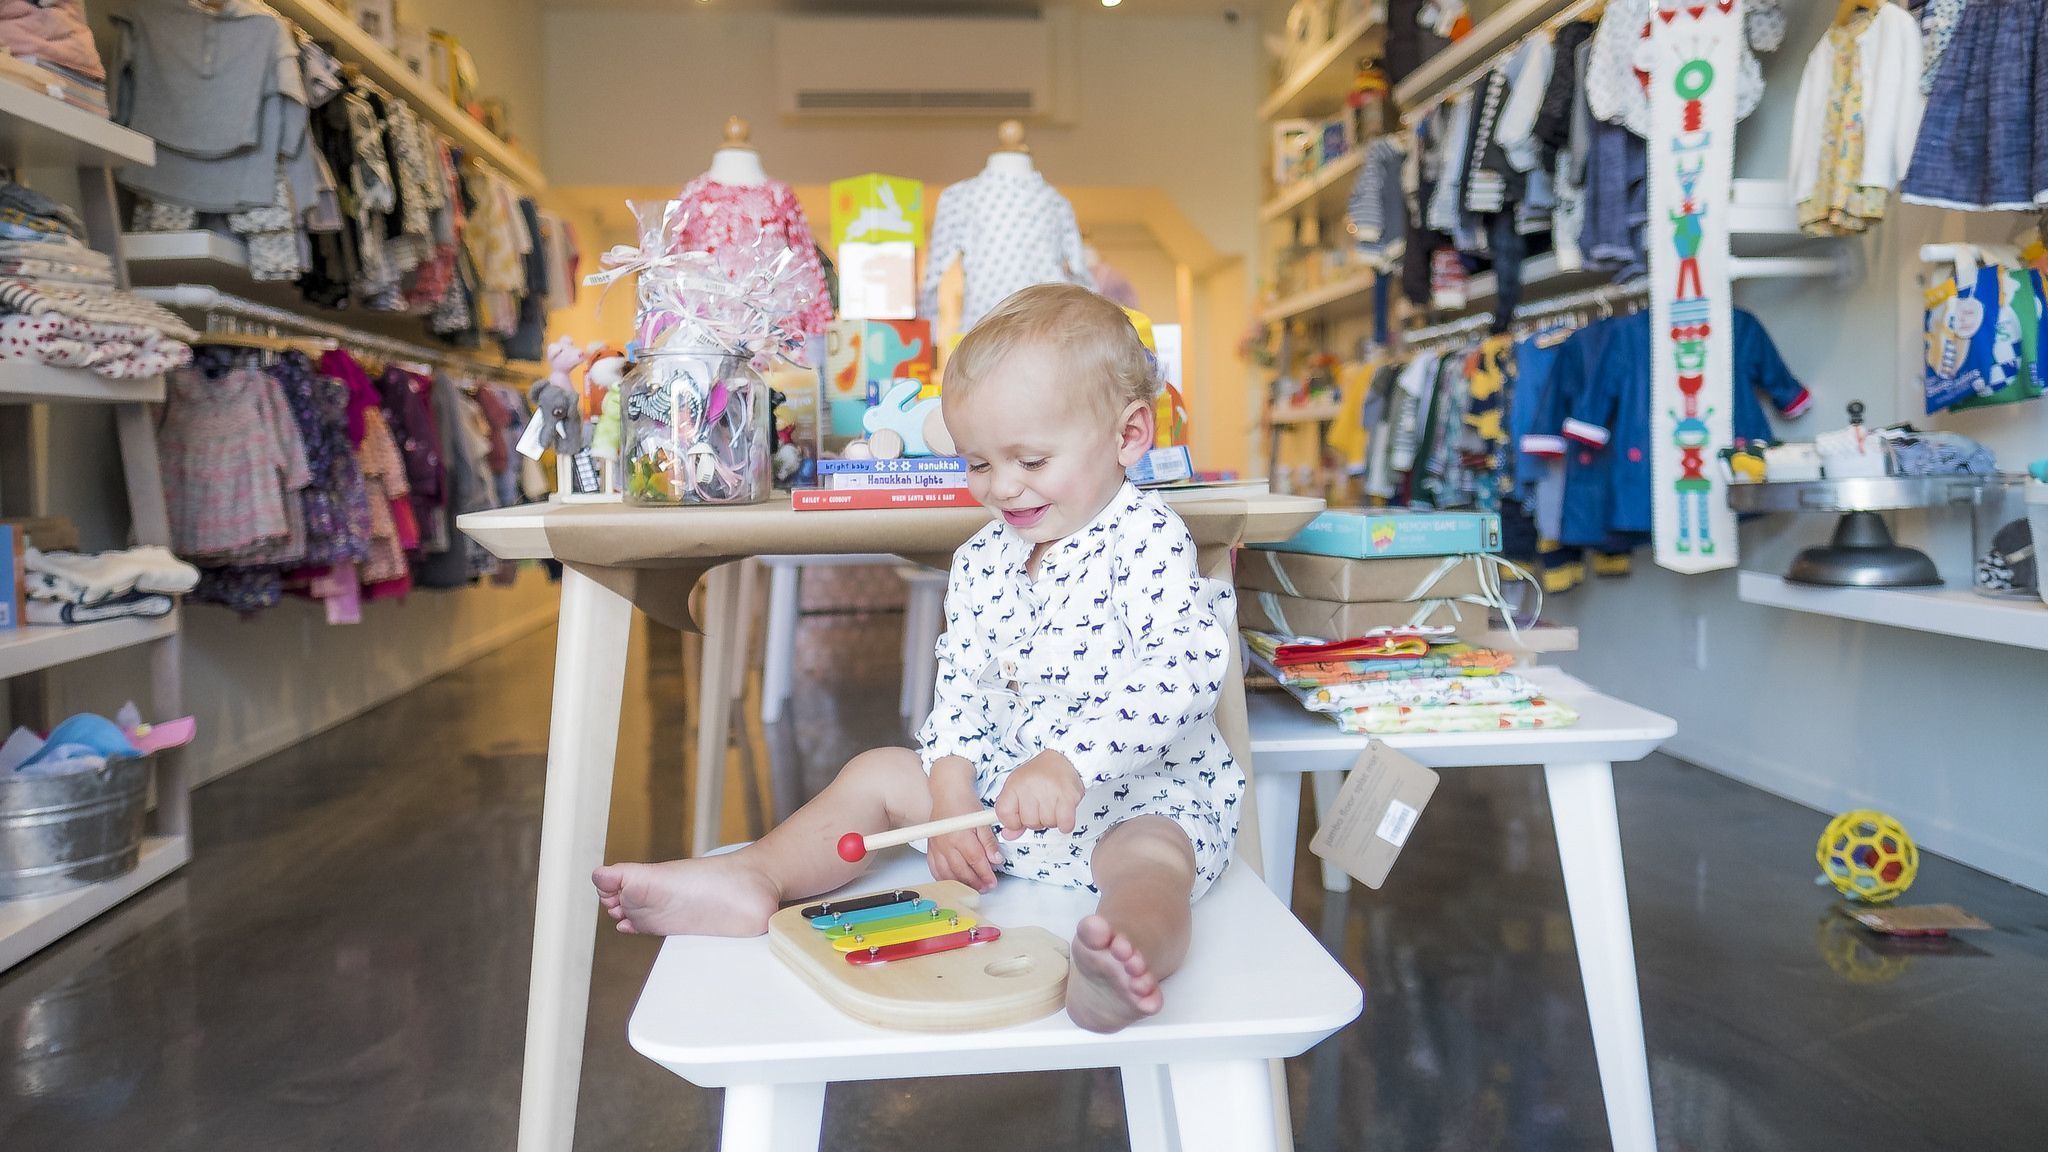 Co-owner Jill Lincoln's son, Charlie, at the Lil Bit children's store in Los Angeles.